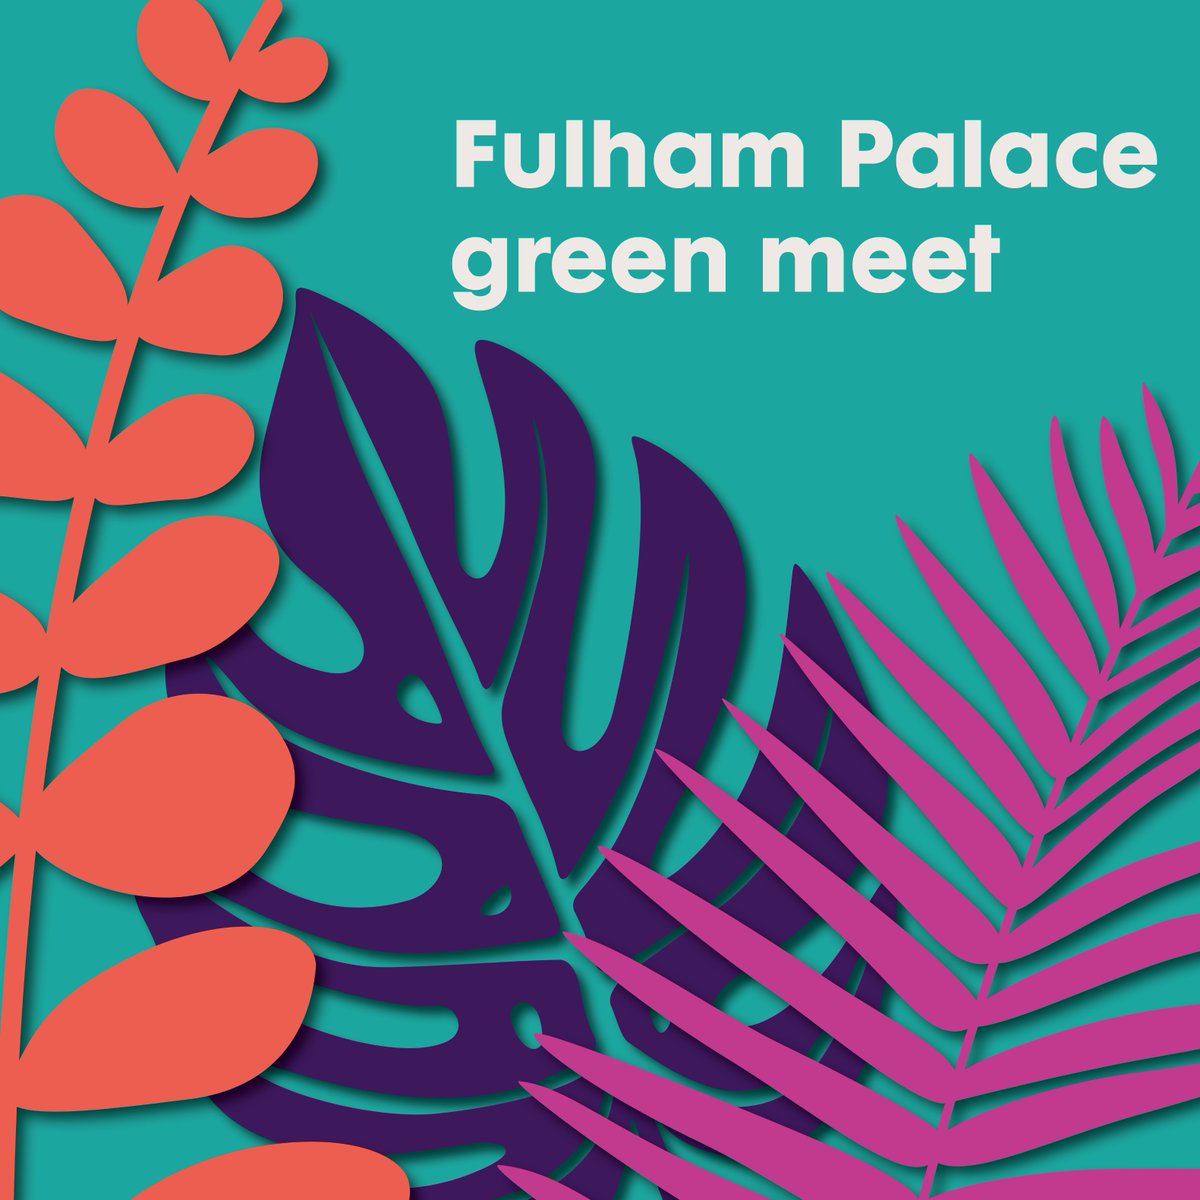 The annual green meet celebration is back! Join us on Sun 5 May and enjoy a variety of activities: 🎵 Live music 🎤 Speciality talks 🌱 Garden games 🛍️ Market 🎟️ Tombola 🌸 and more! Be sure to pre-book your free ticket today! Join the fun: bit.ly/49lz6Jy